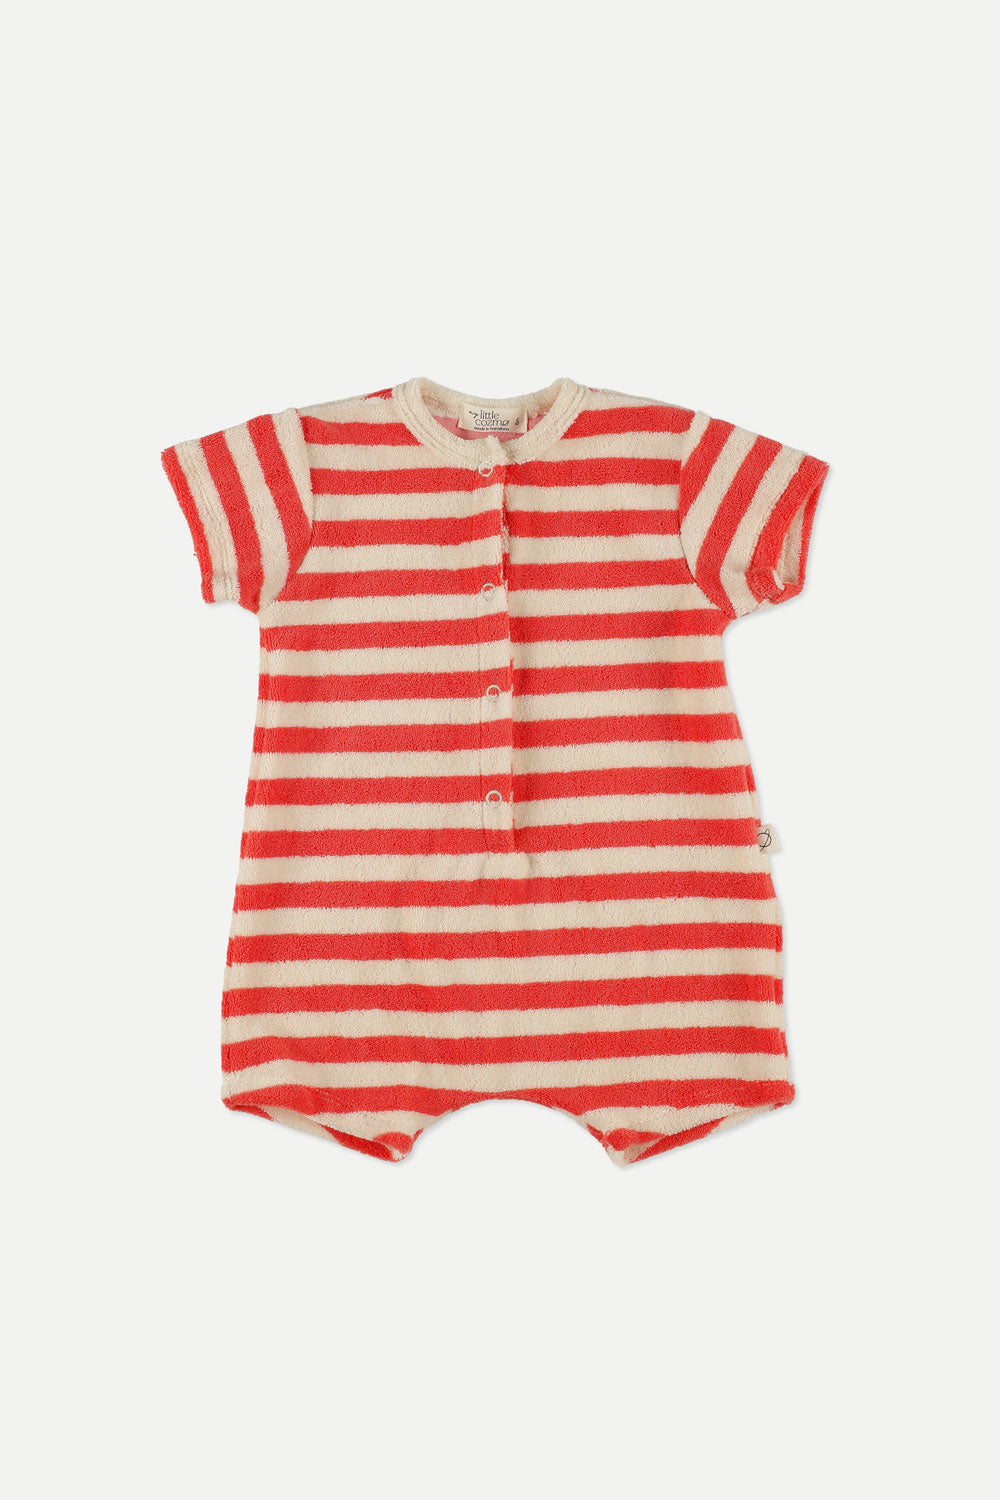 My little cozmo - archer269 - terry stripes romper - ruby